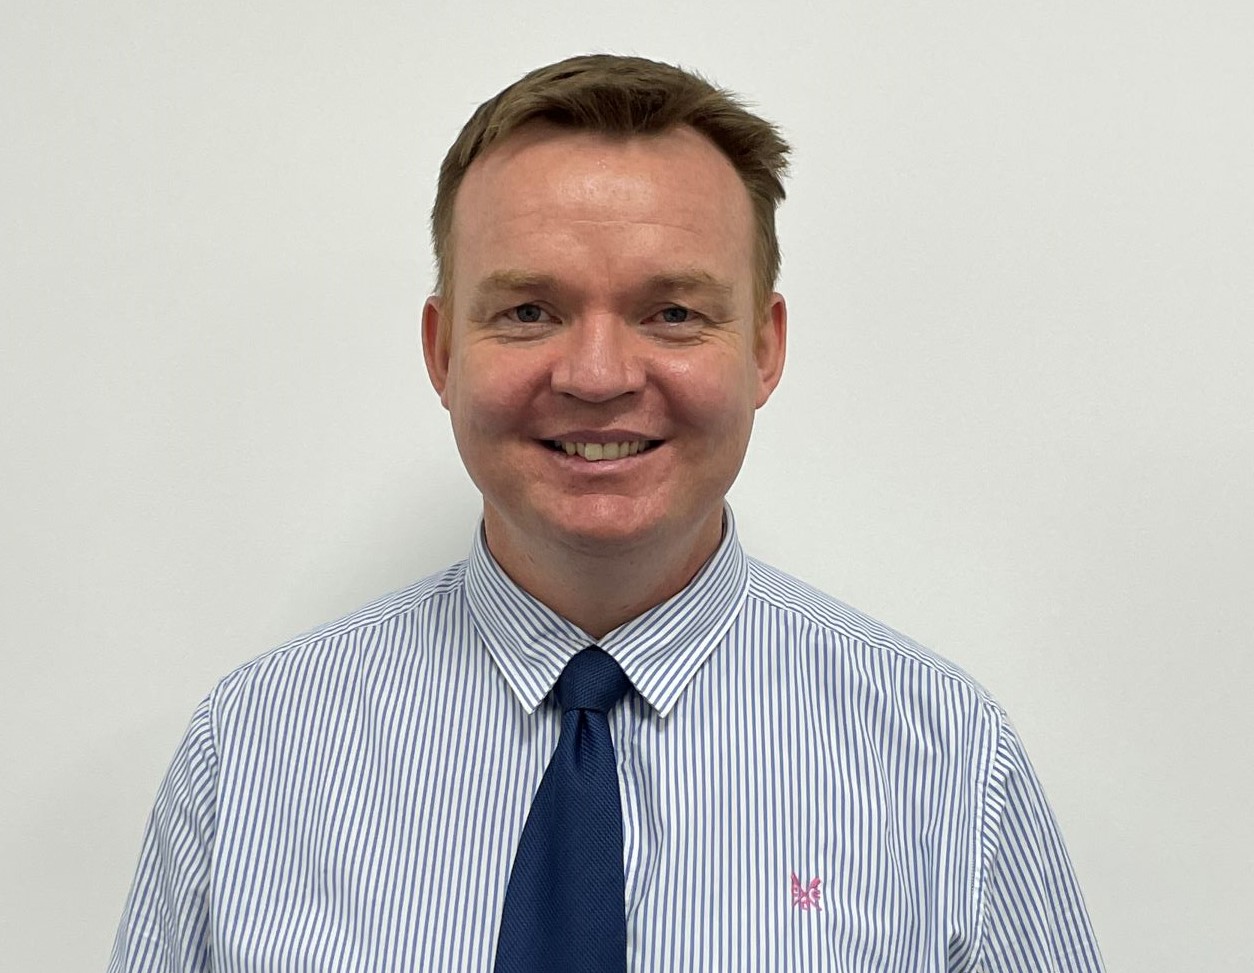 James Cook, Divisional Director - Commercial and Business Development